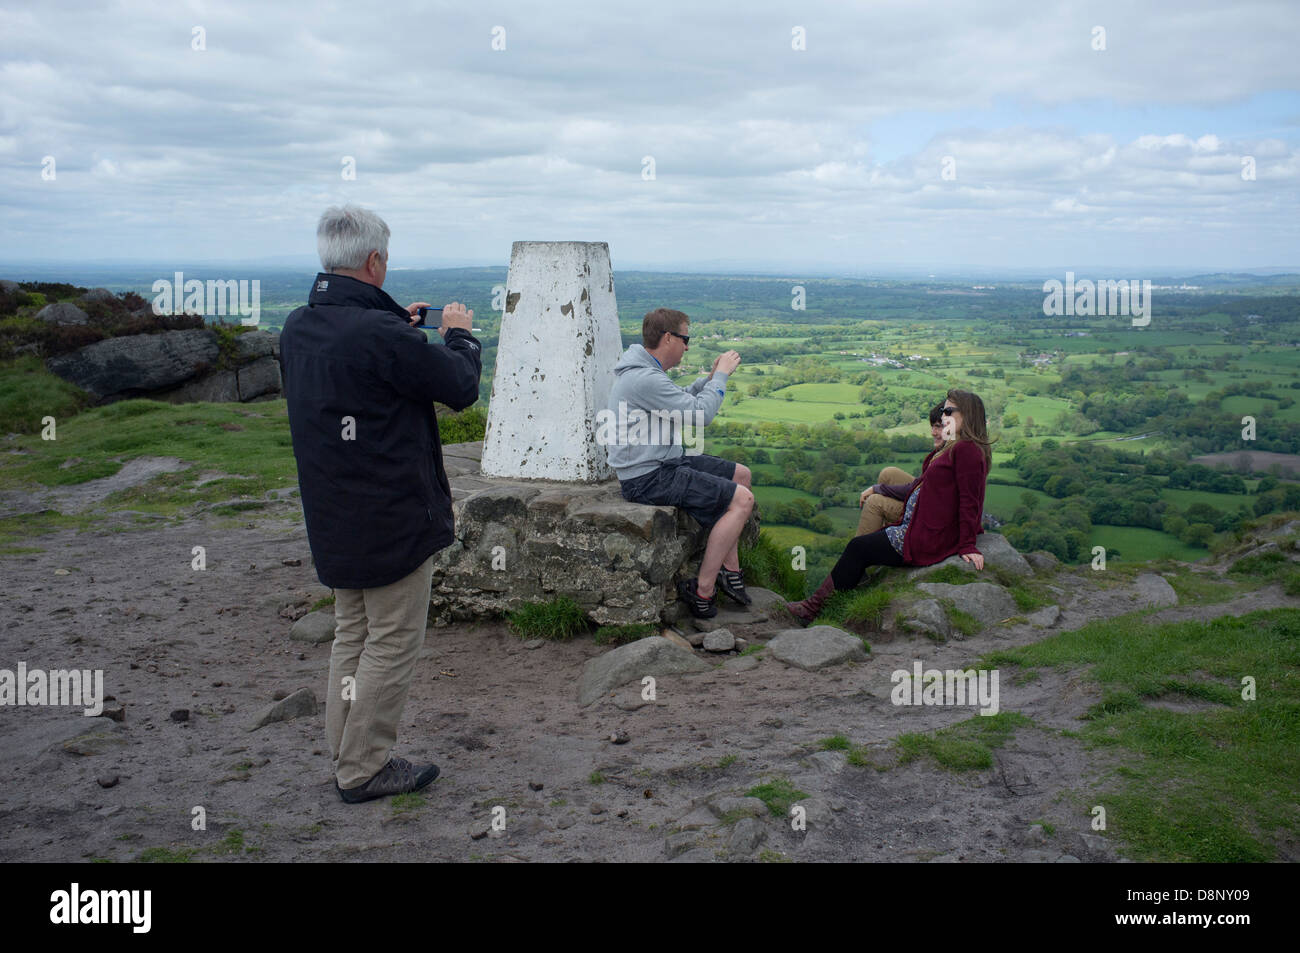 A family stops to take photographs on Bosley Cloud, on the Staffordshire Way in England. Stock Photo